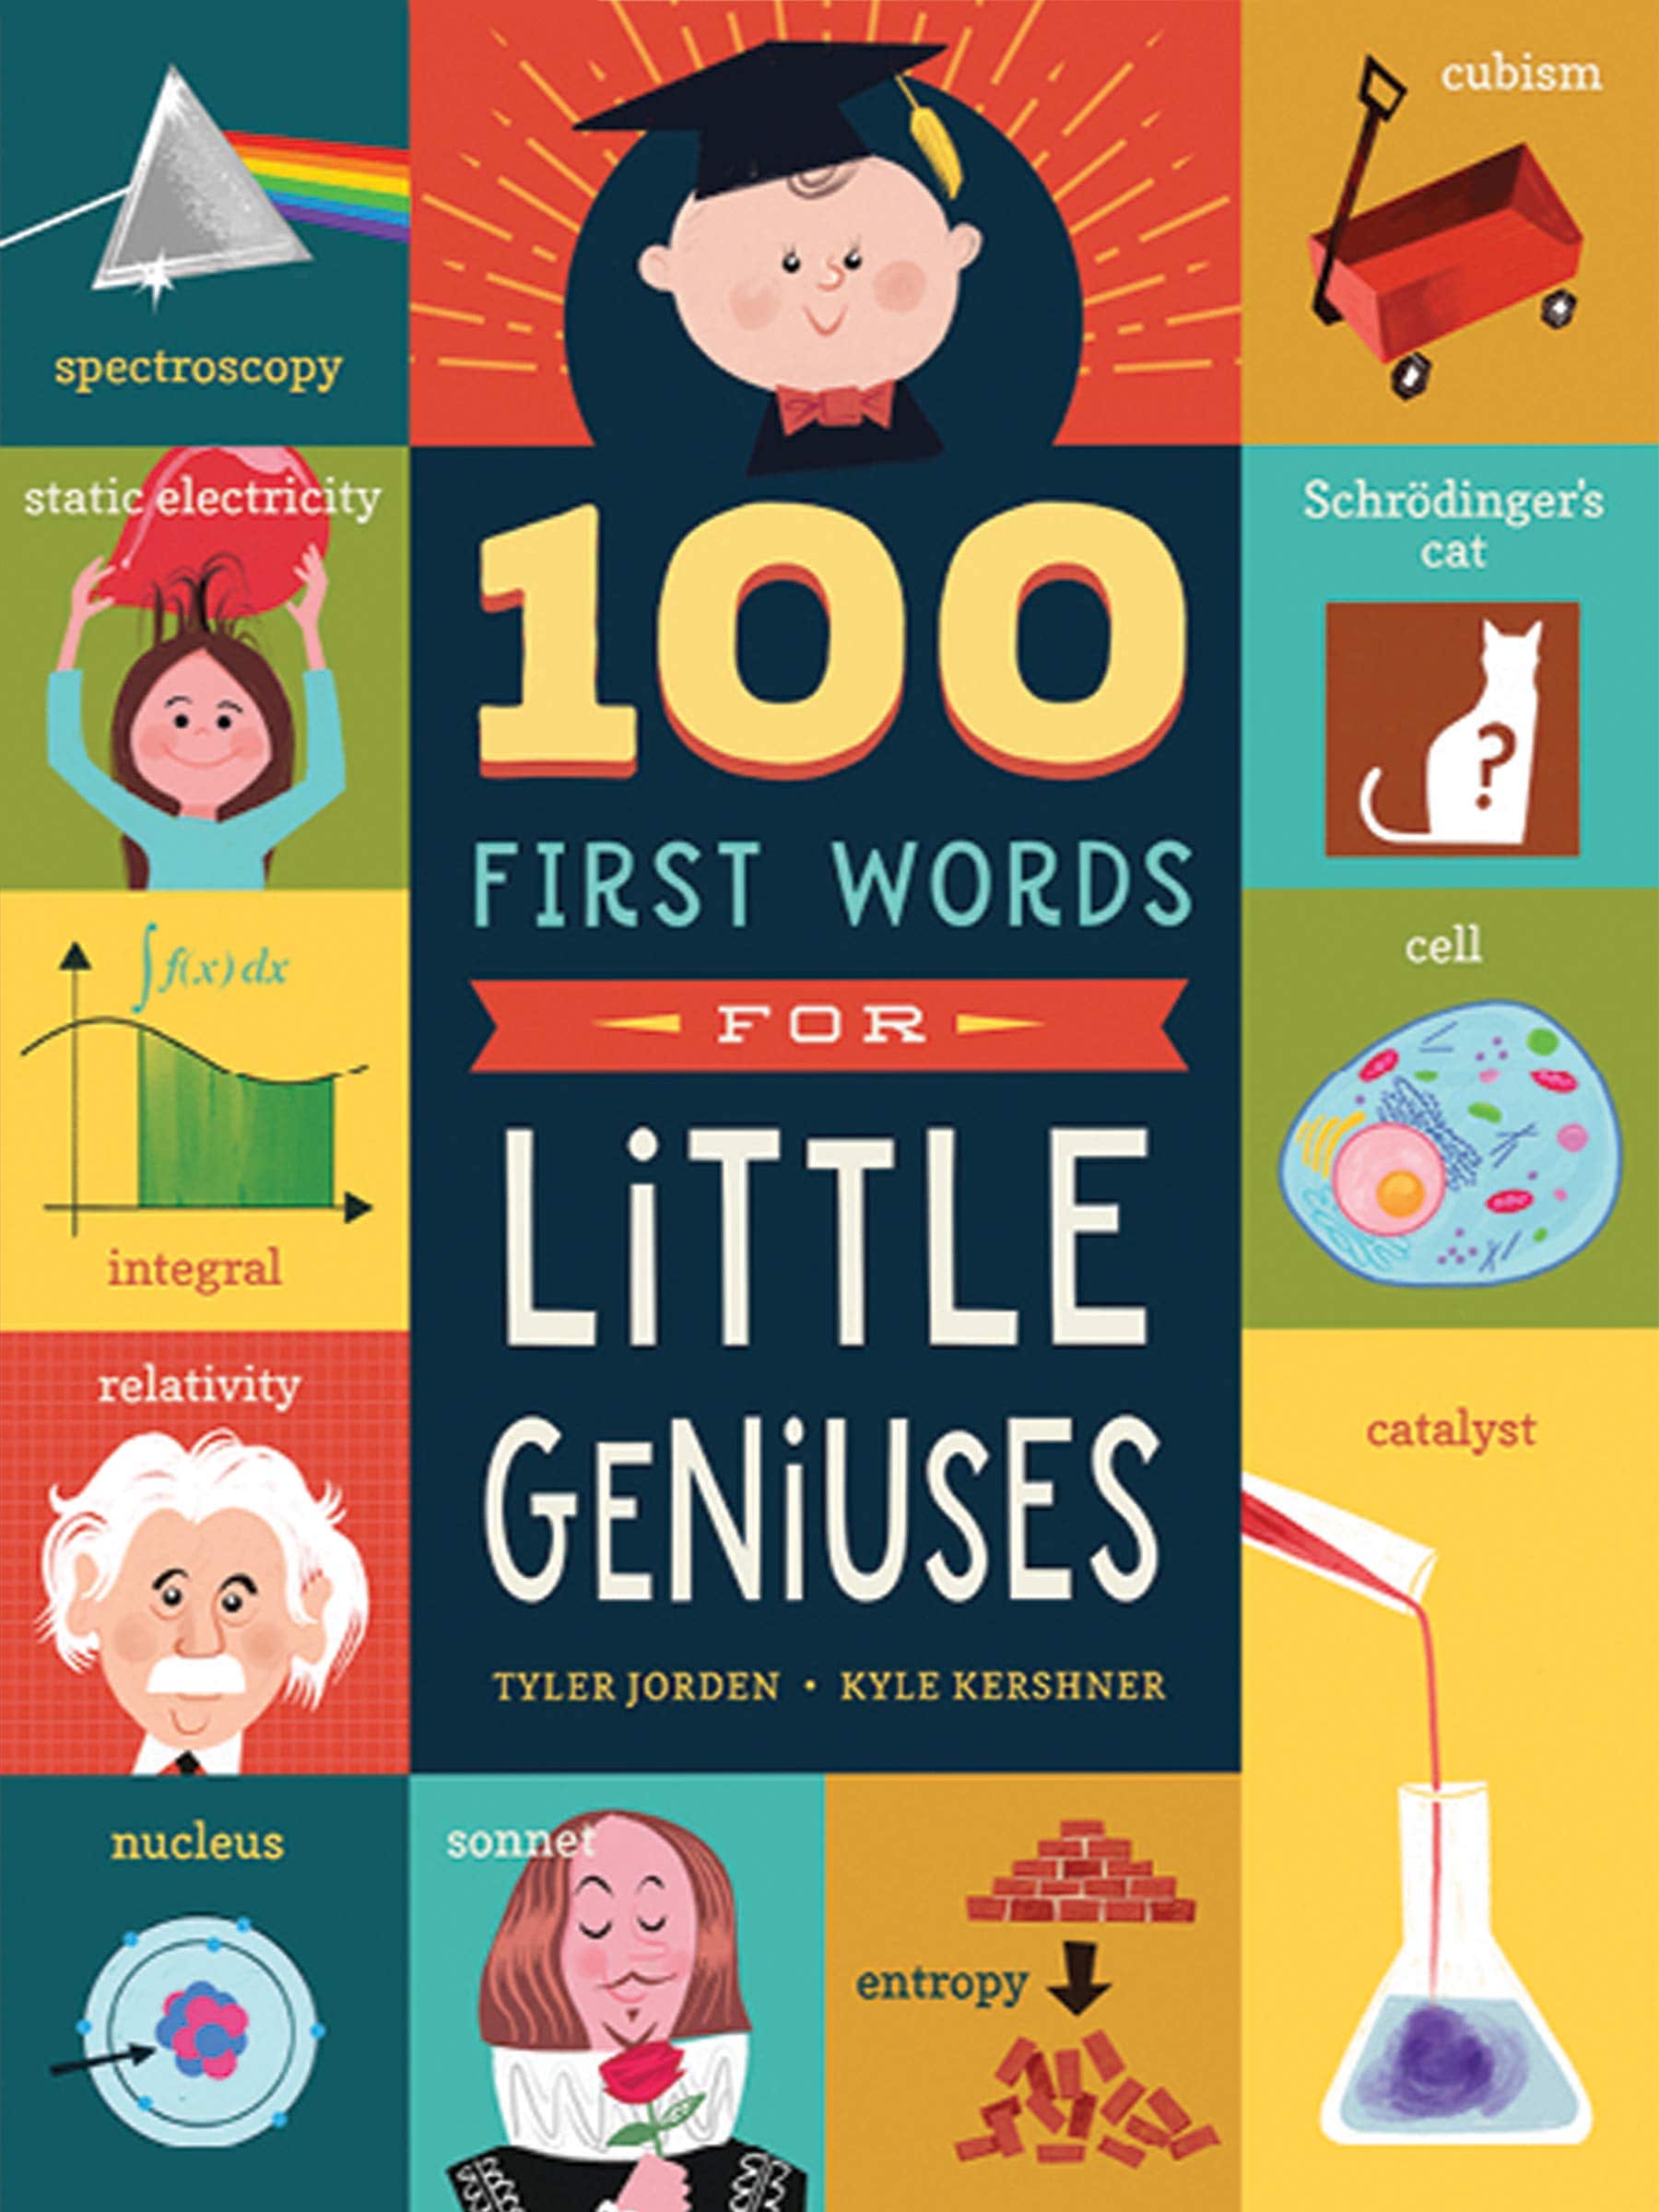 100 First Words for Lil Genious - Twinkle Twinkle Little One